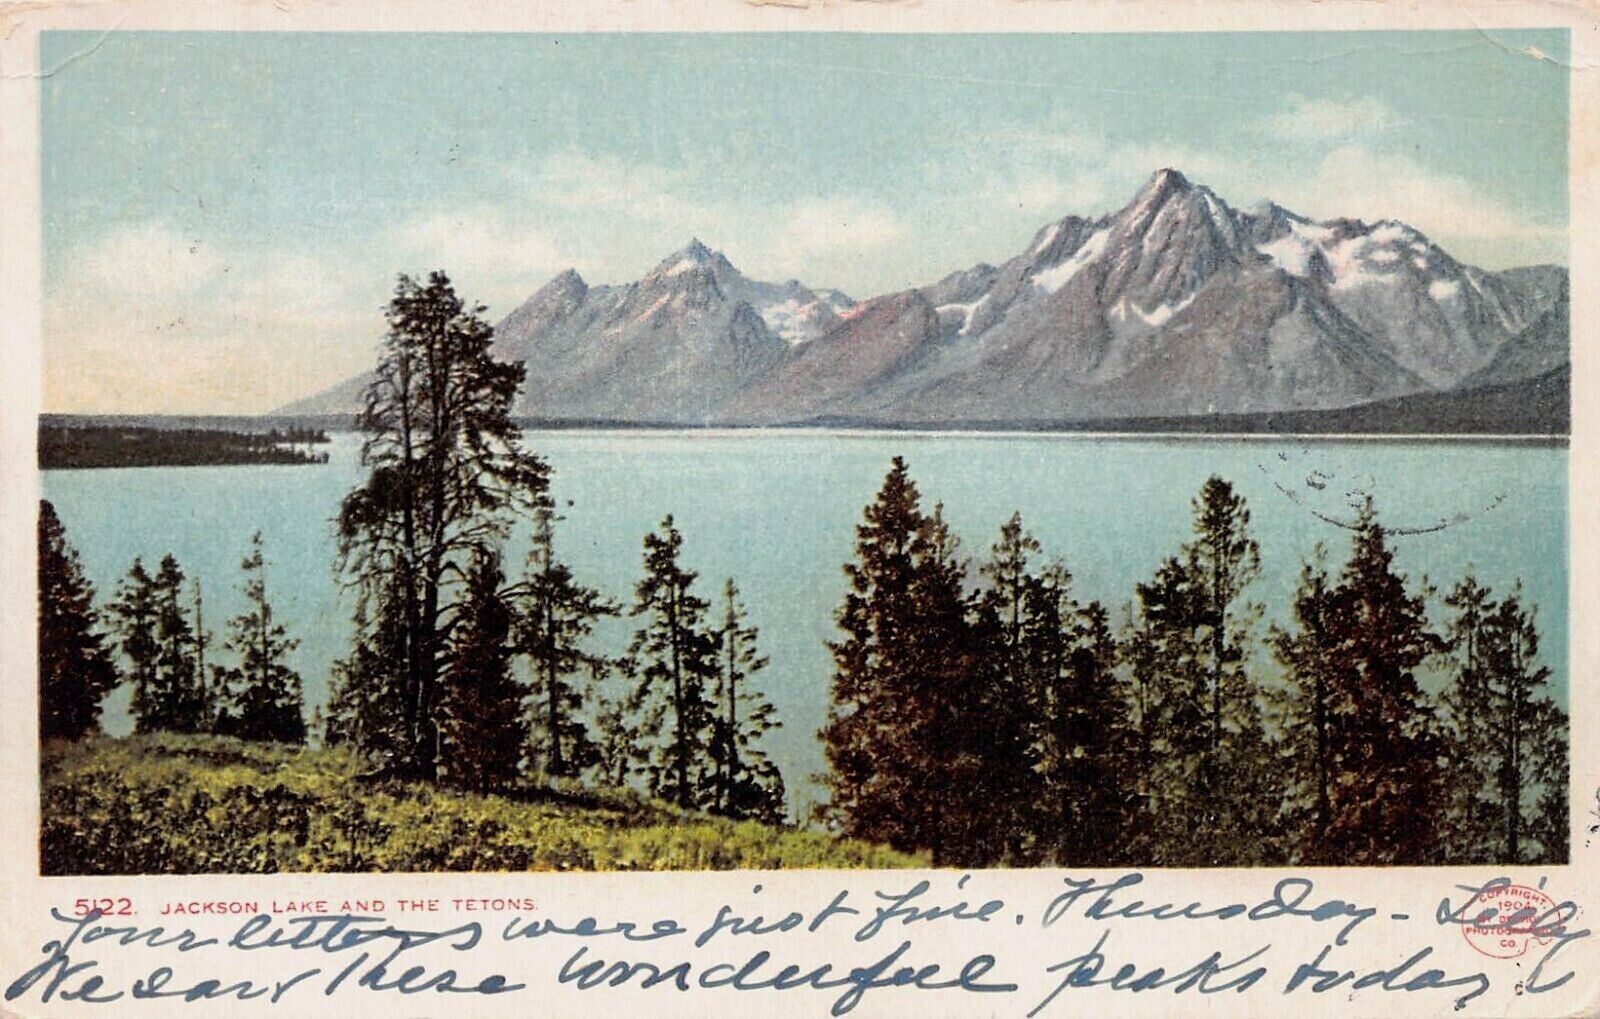 Jackson Lake and the Tetons, 1904 Postcard, Detroit Photographic, Used in 1906